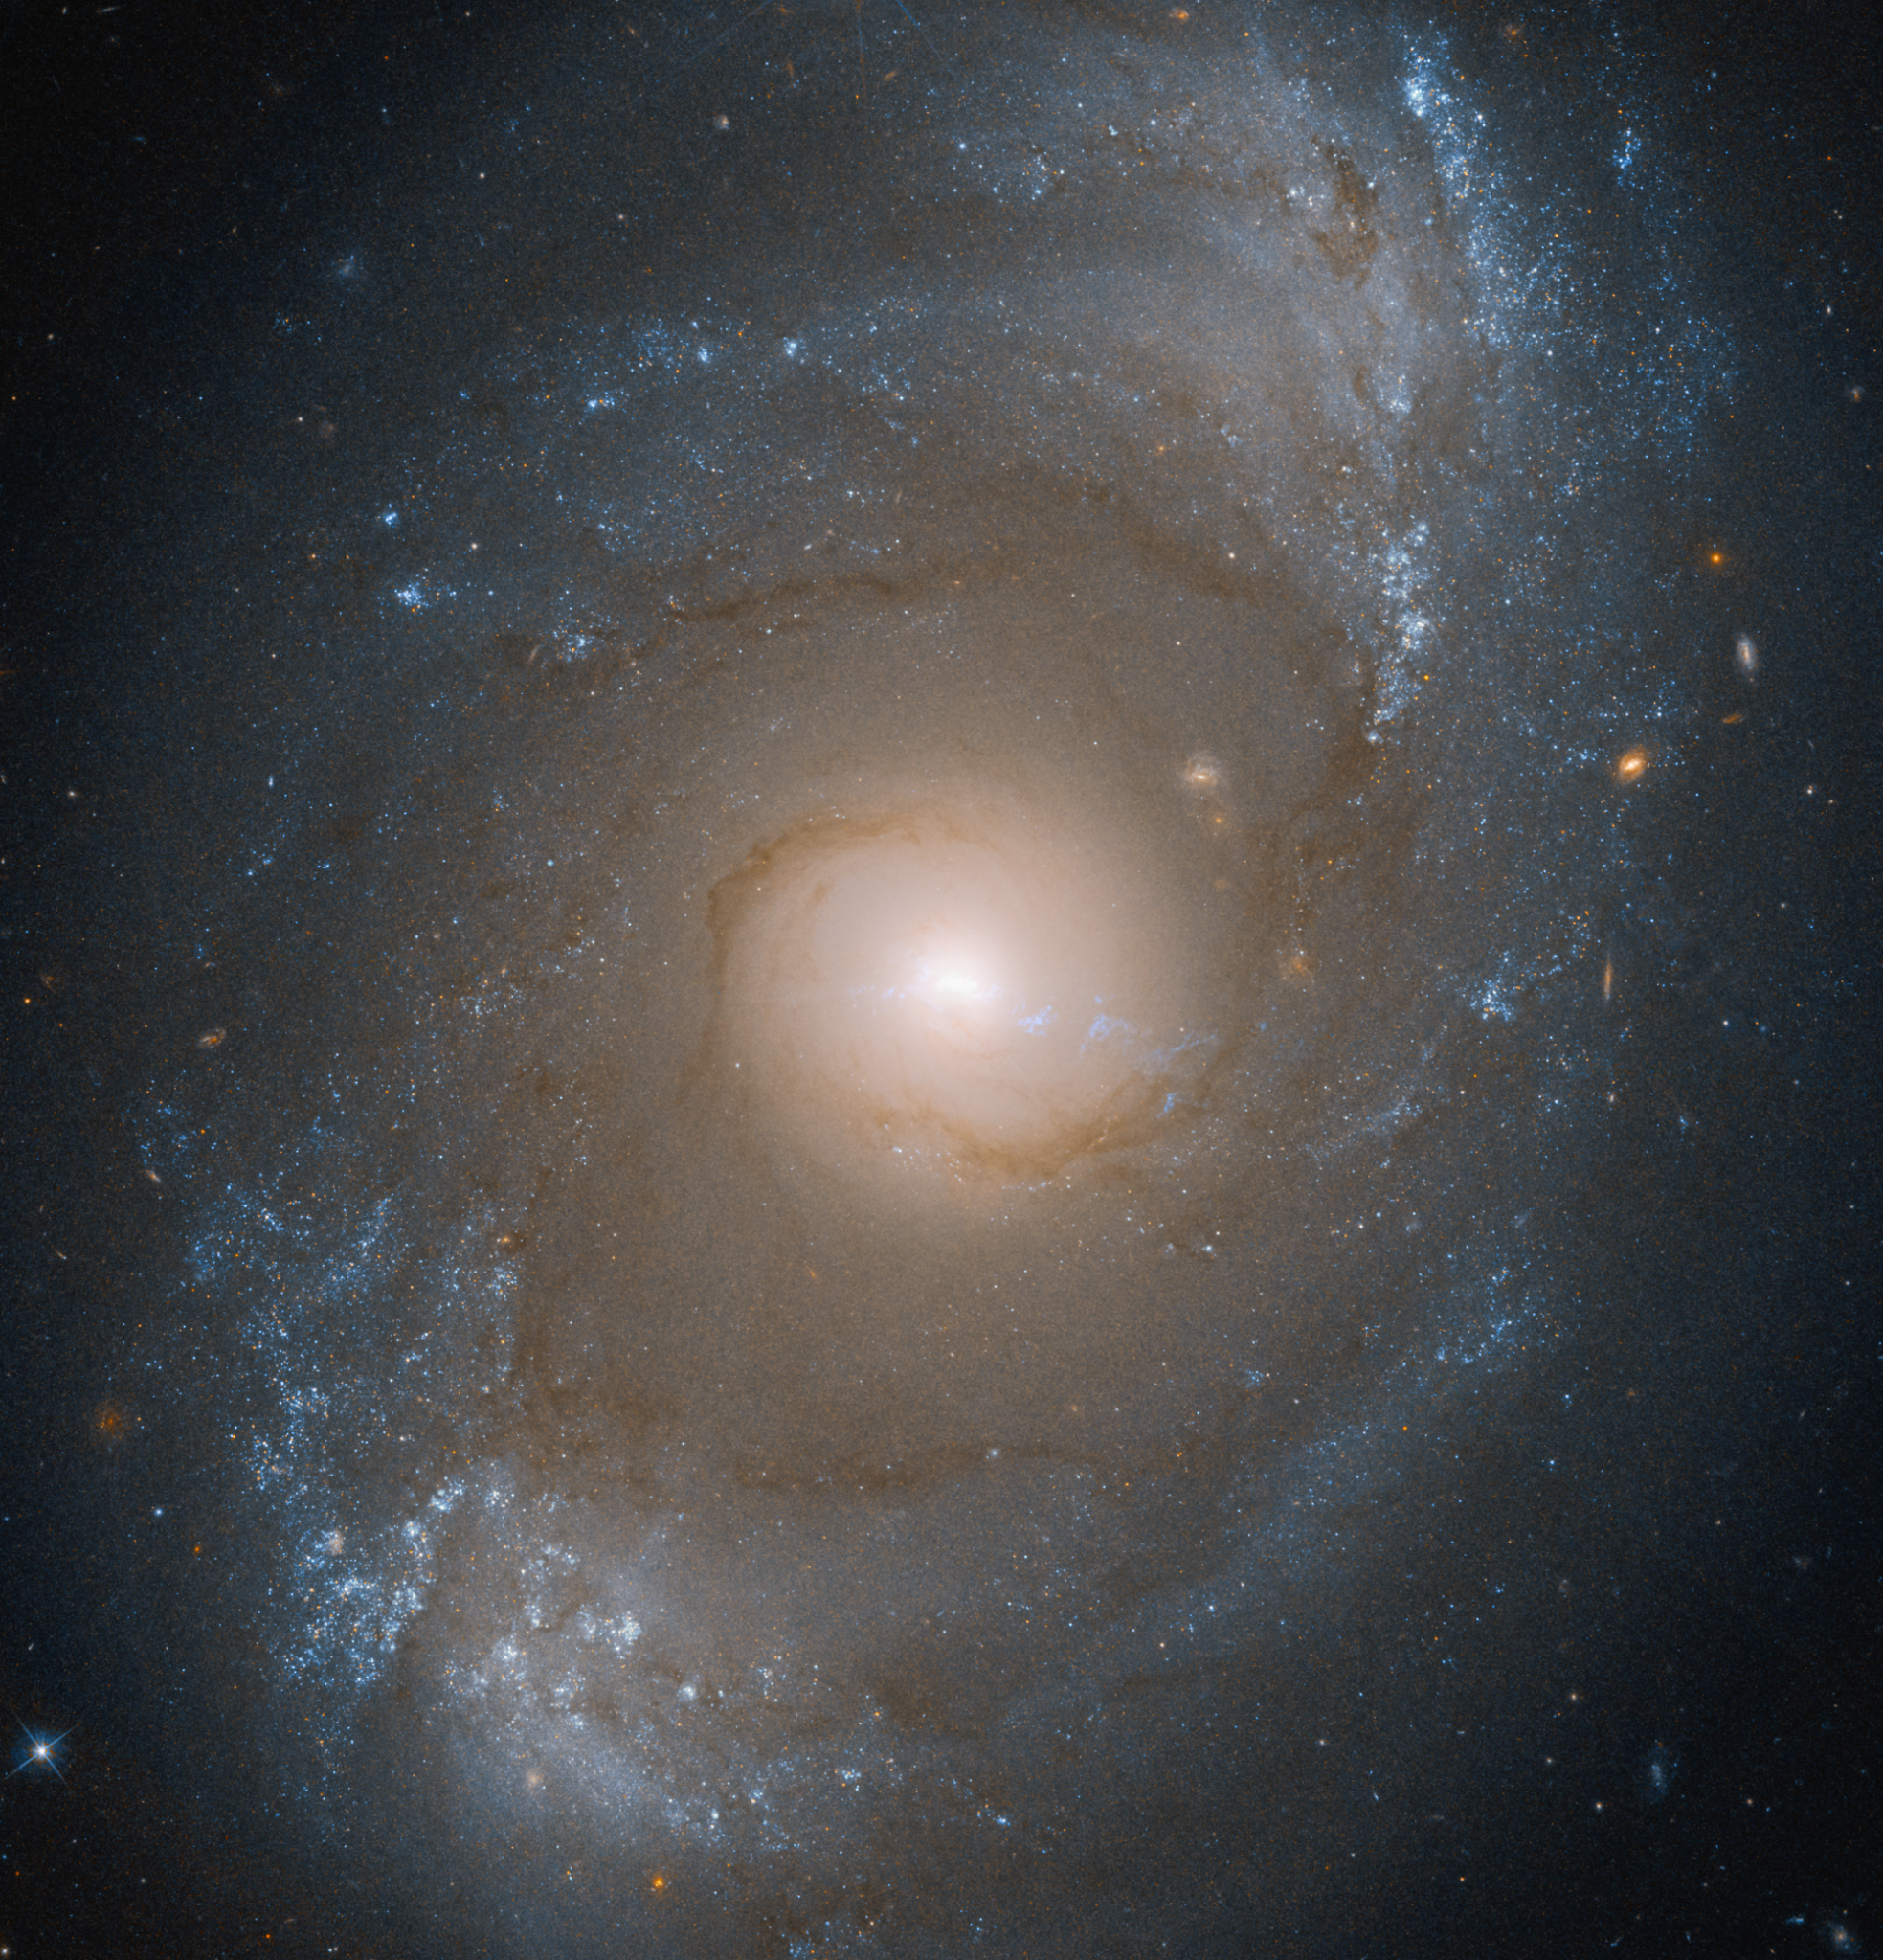 Image of a spiral galaxy